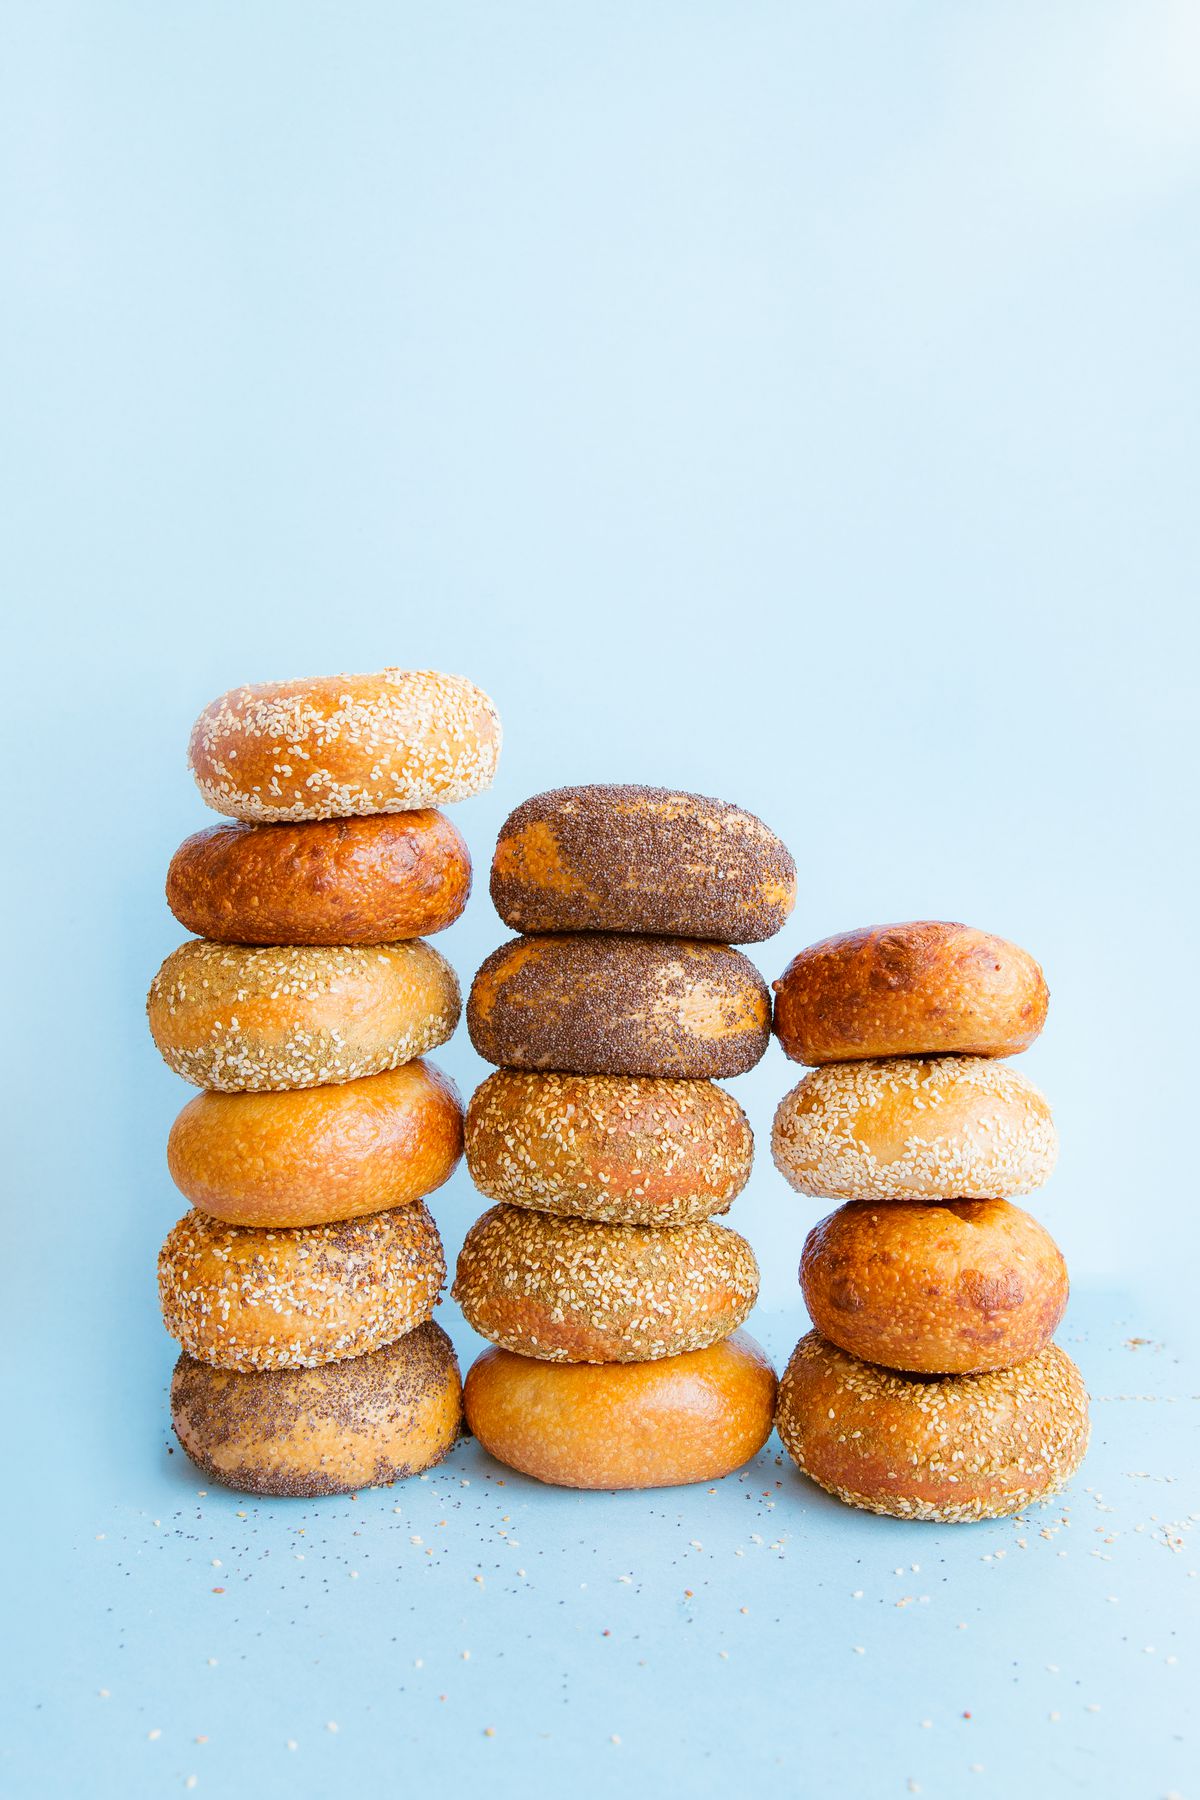 Three stacks of bagels, the tallest with six bagels stacked on top of each other, on a light blue surface.